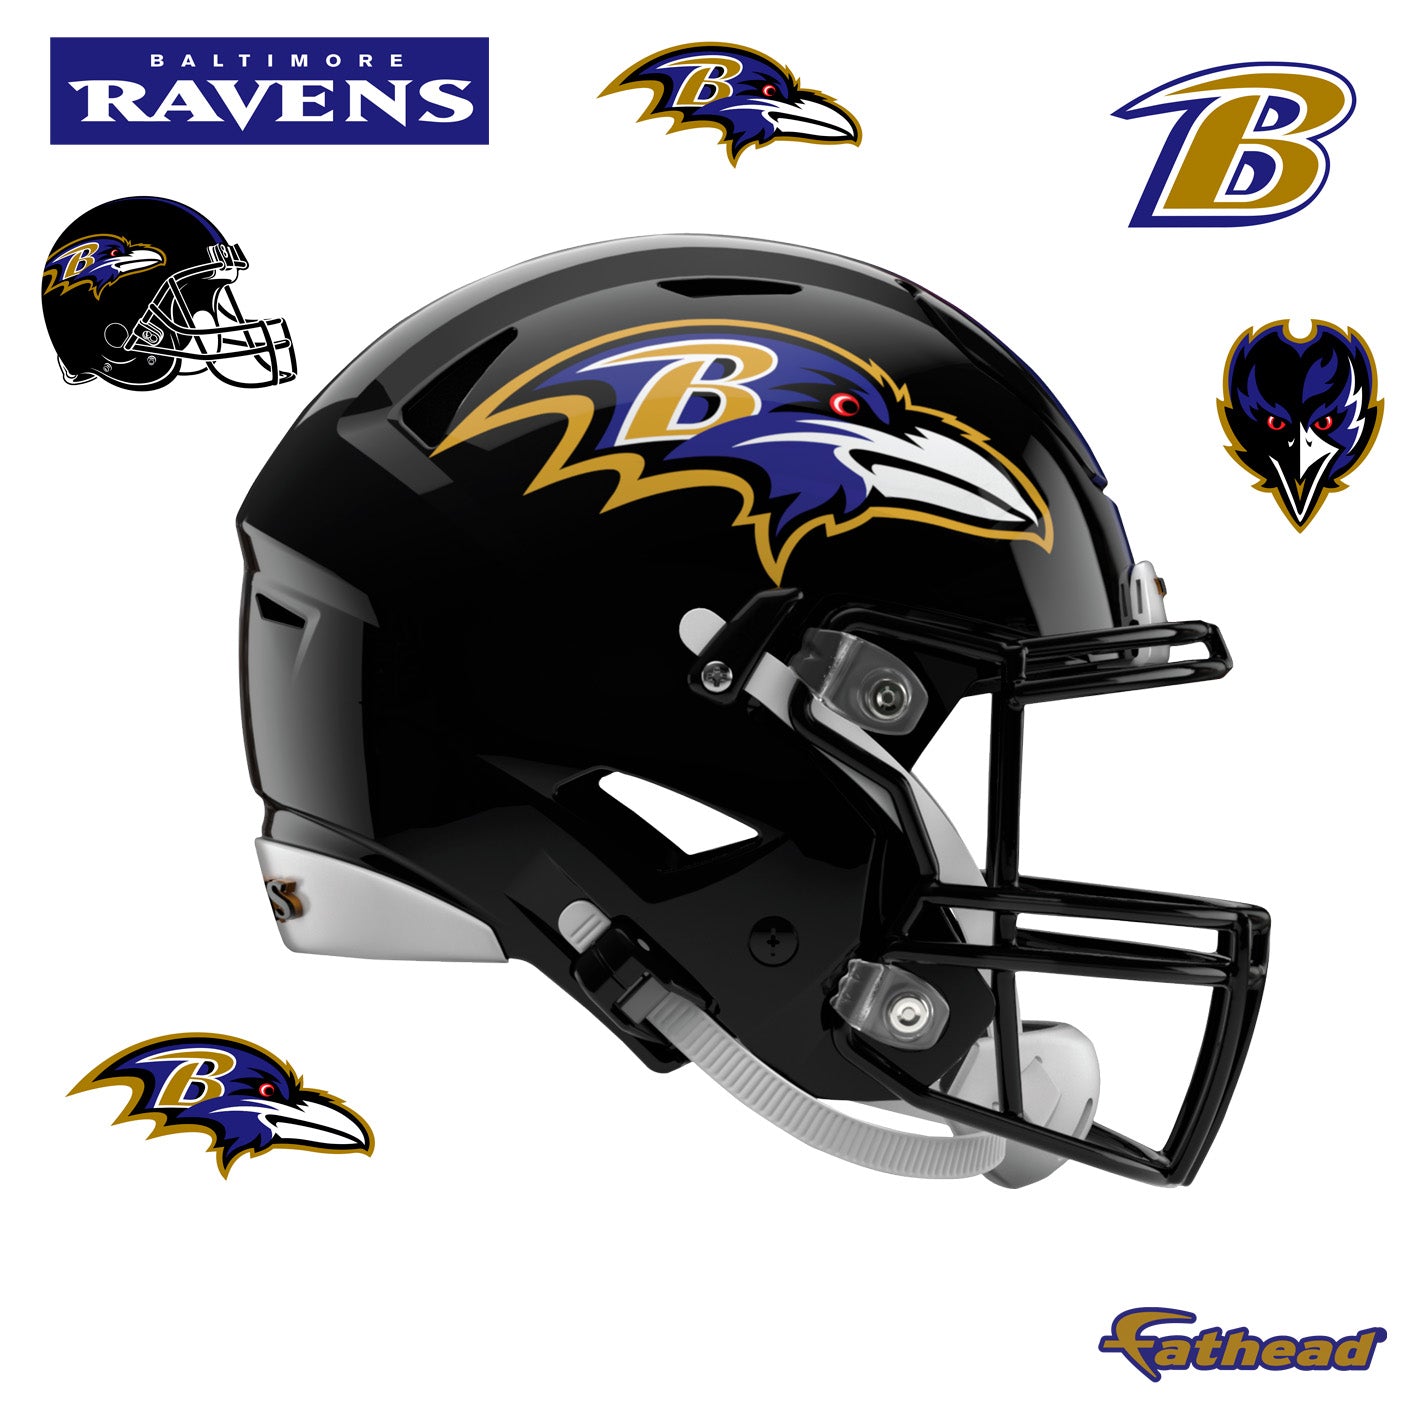 Fathead Baltimore Ravens Giant Removable Helmet Wall Decal